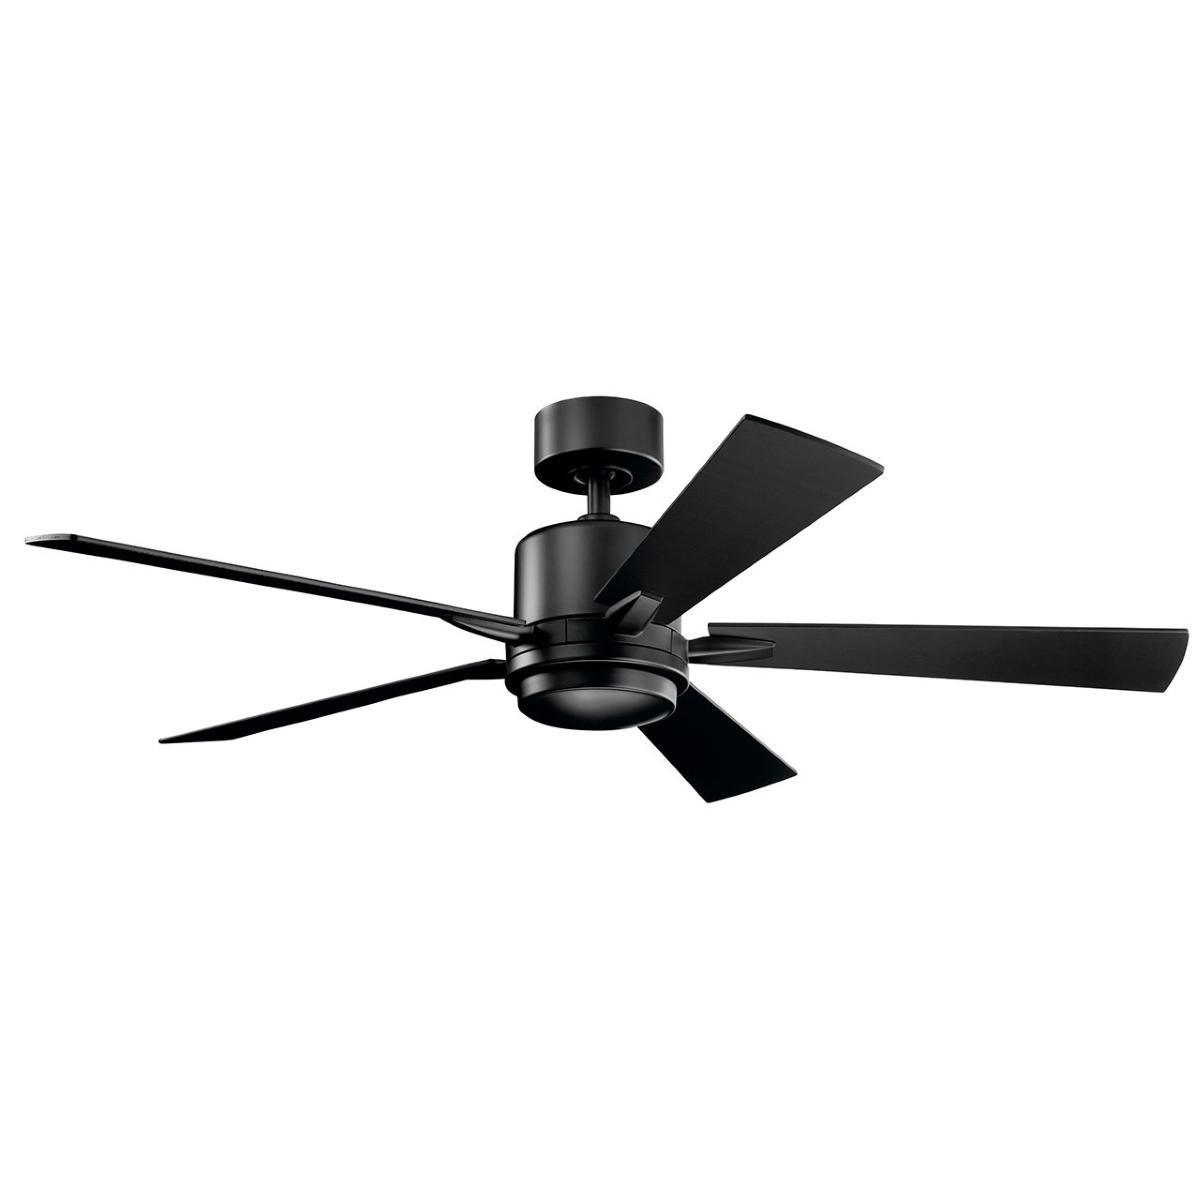 Lucian Elite 52 Inch Ceiling Fan With Light, Wall Control Included